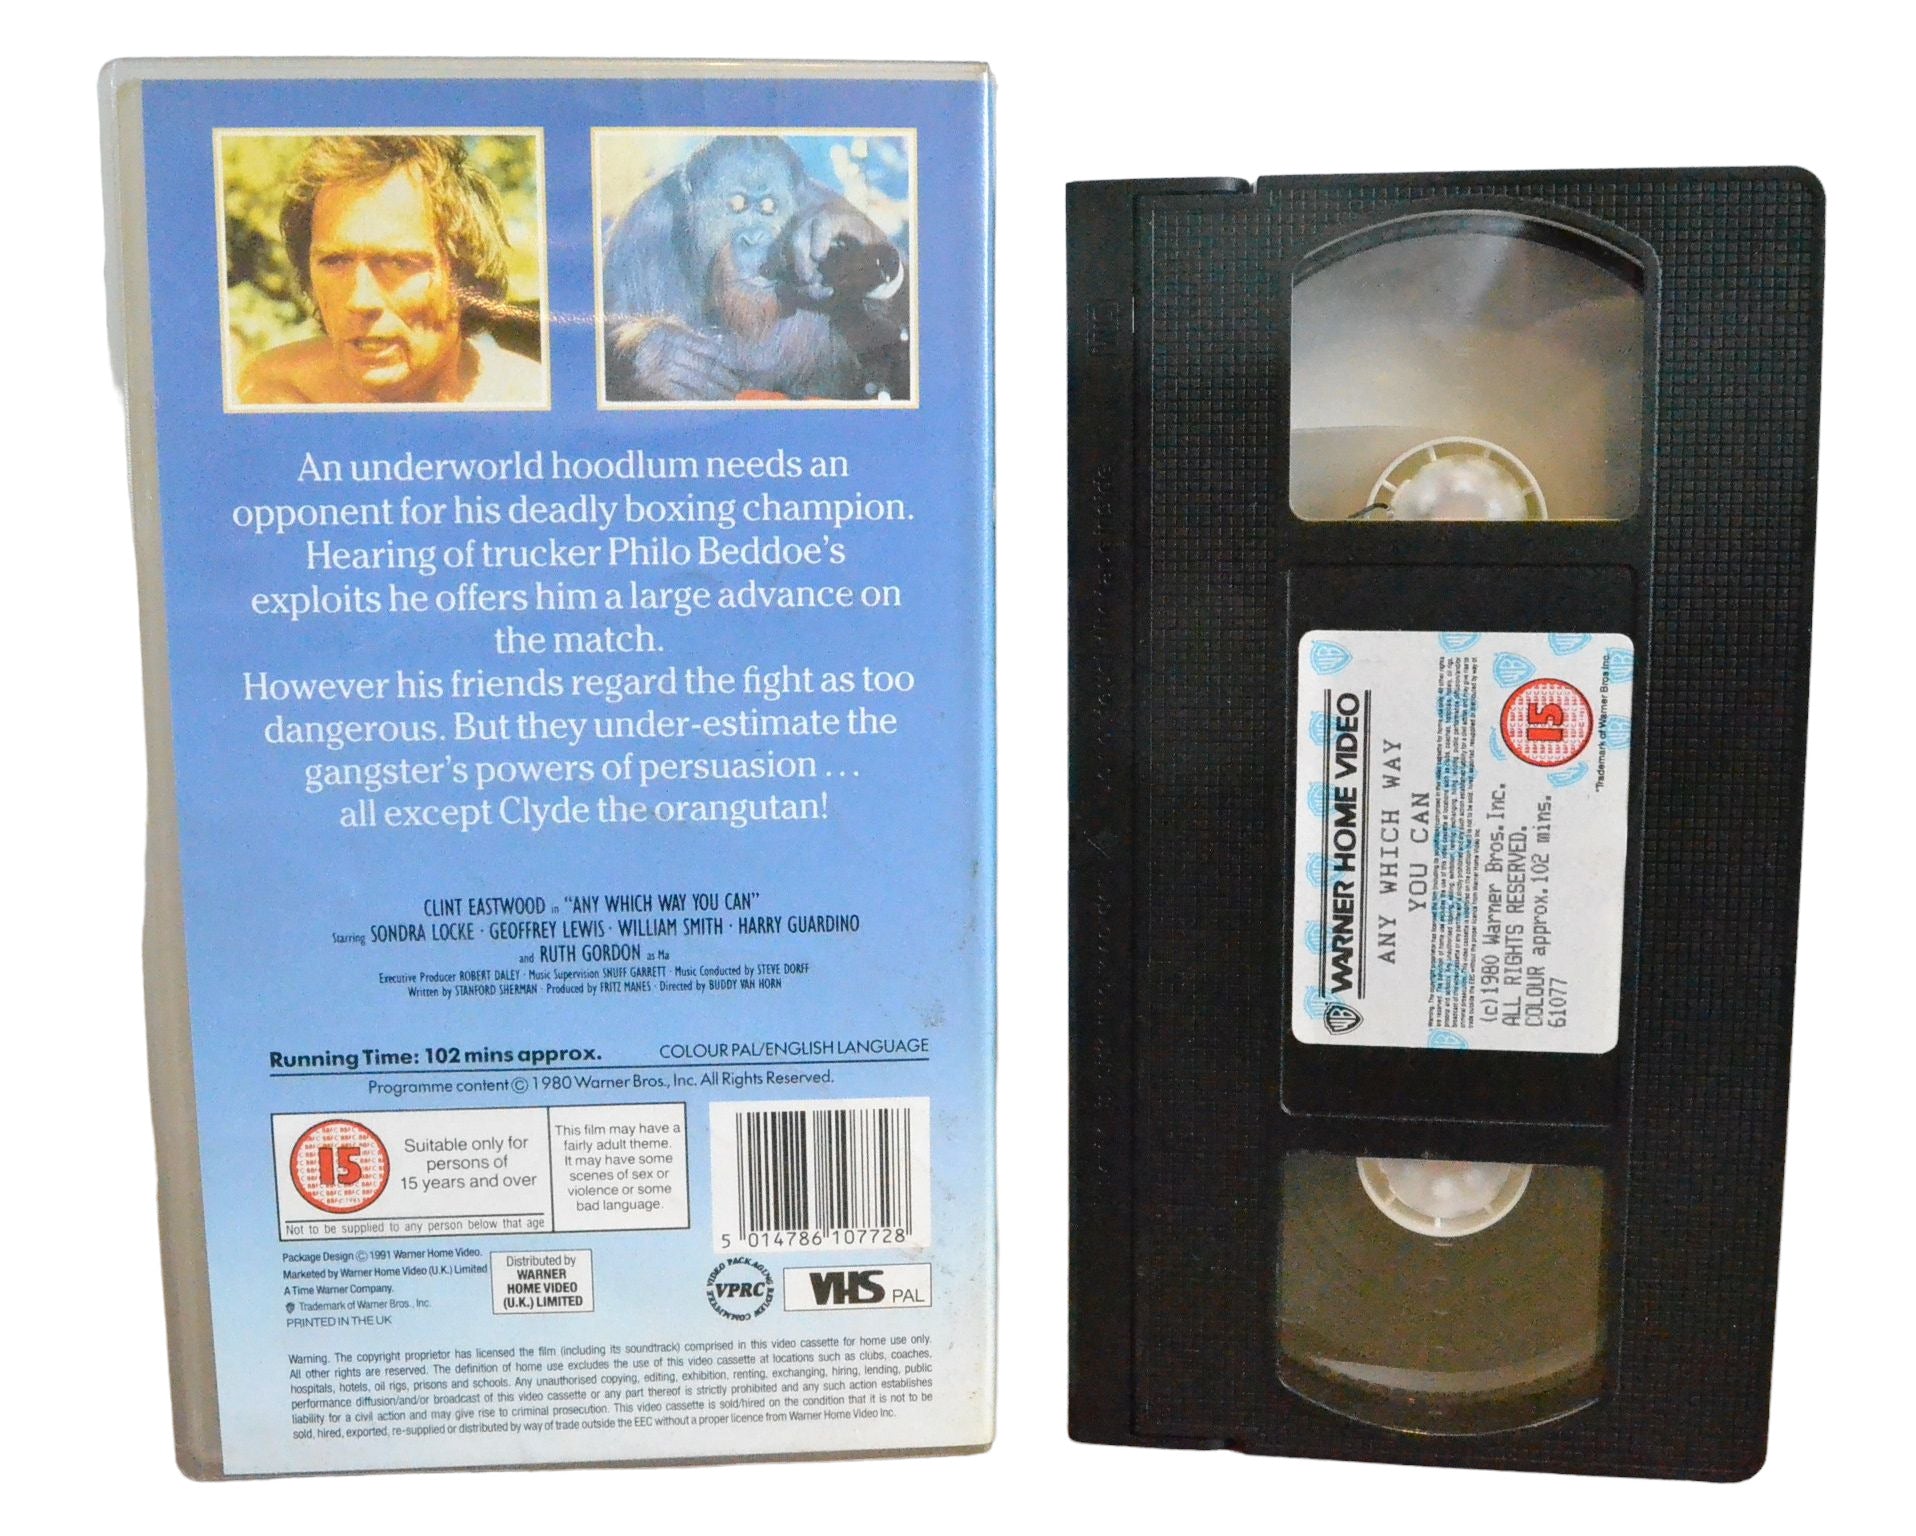 Any Which Way You Can - Clint Eastwood - Warner Home Video - PES61077 - Action - Pal - VHS-